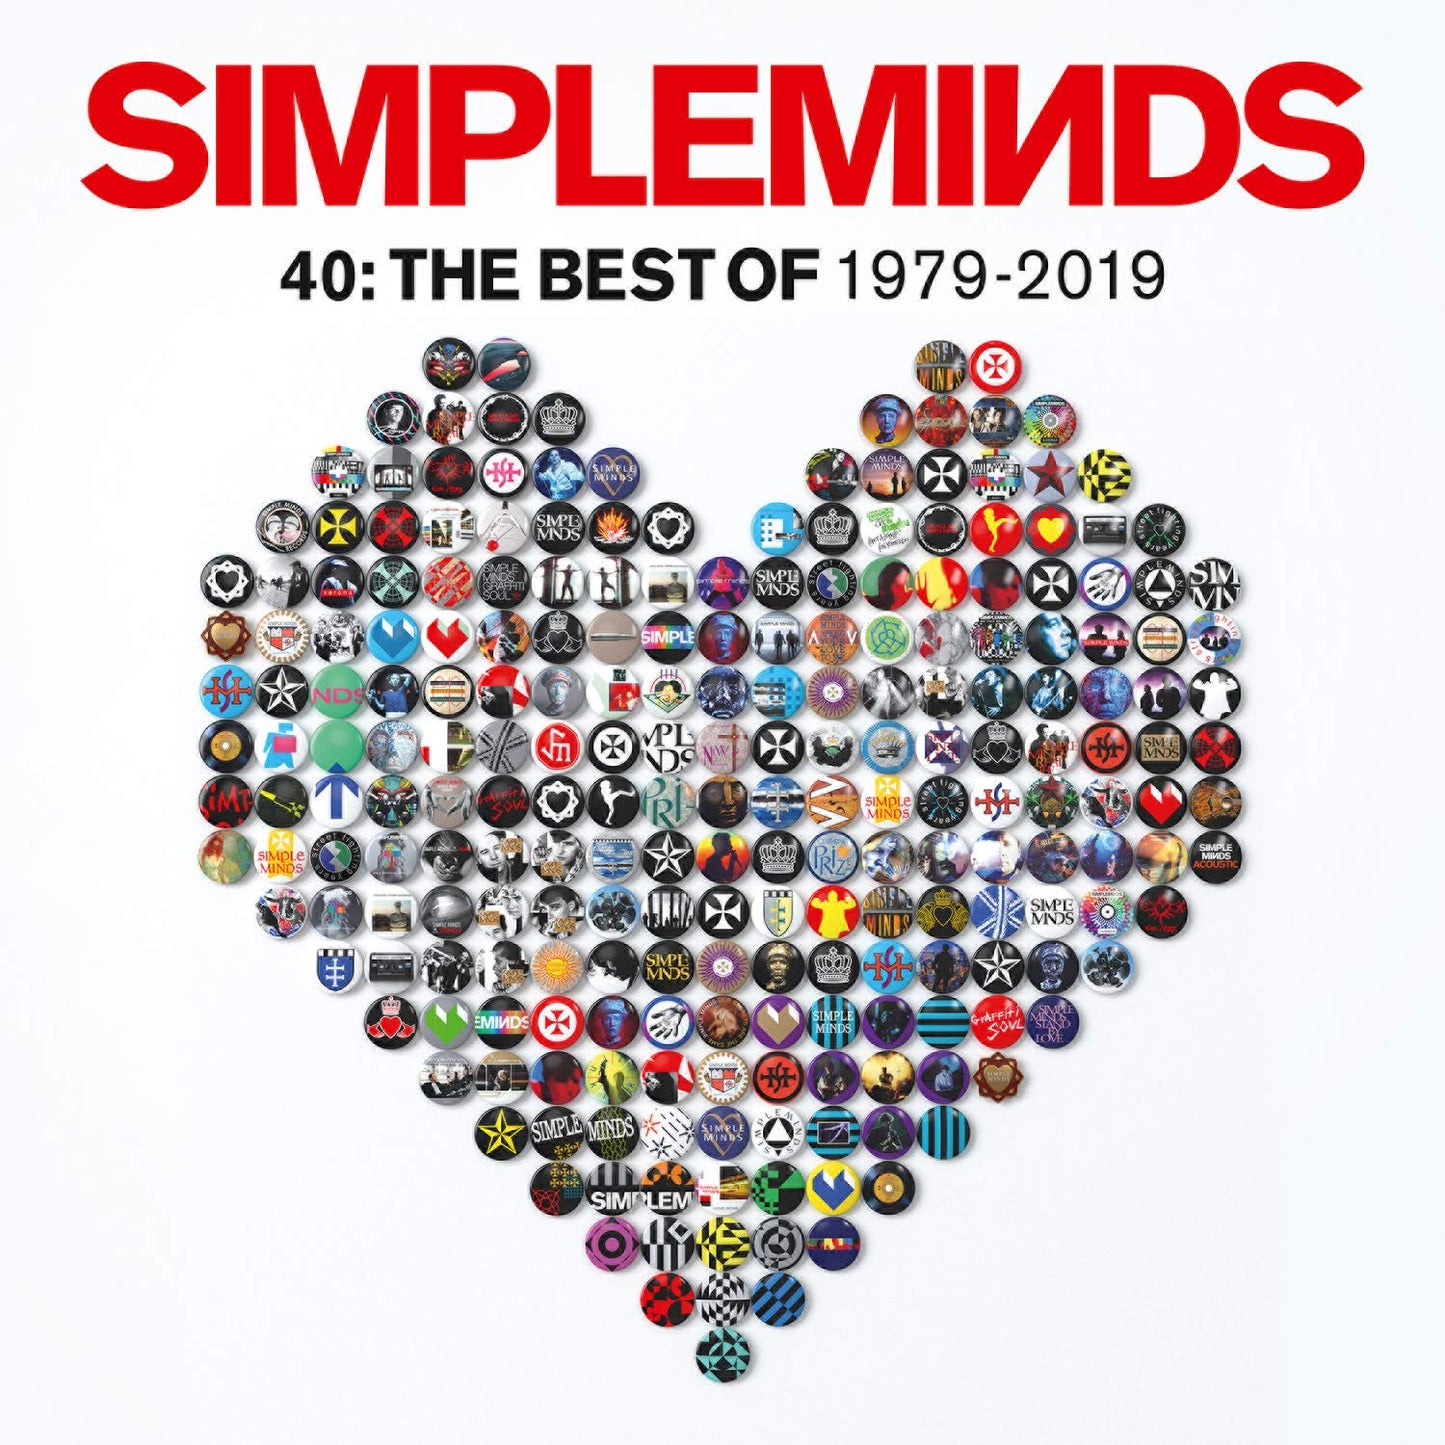 Simple Minds - 40: The Best Of - 3CD